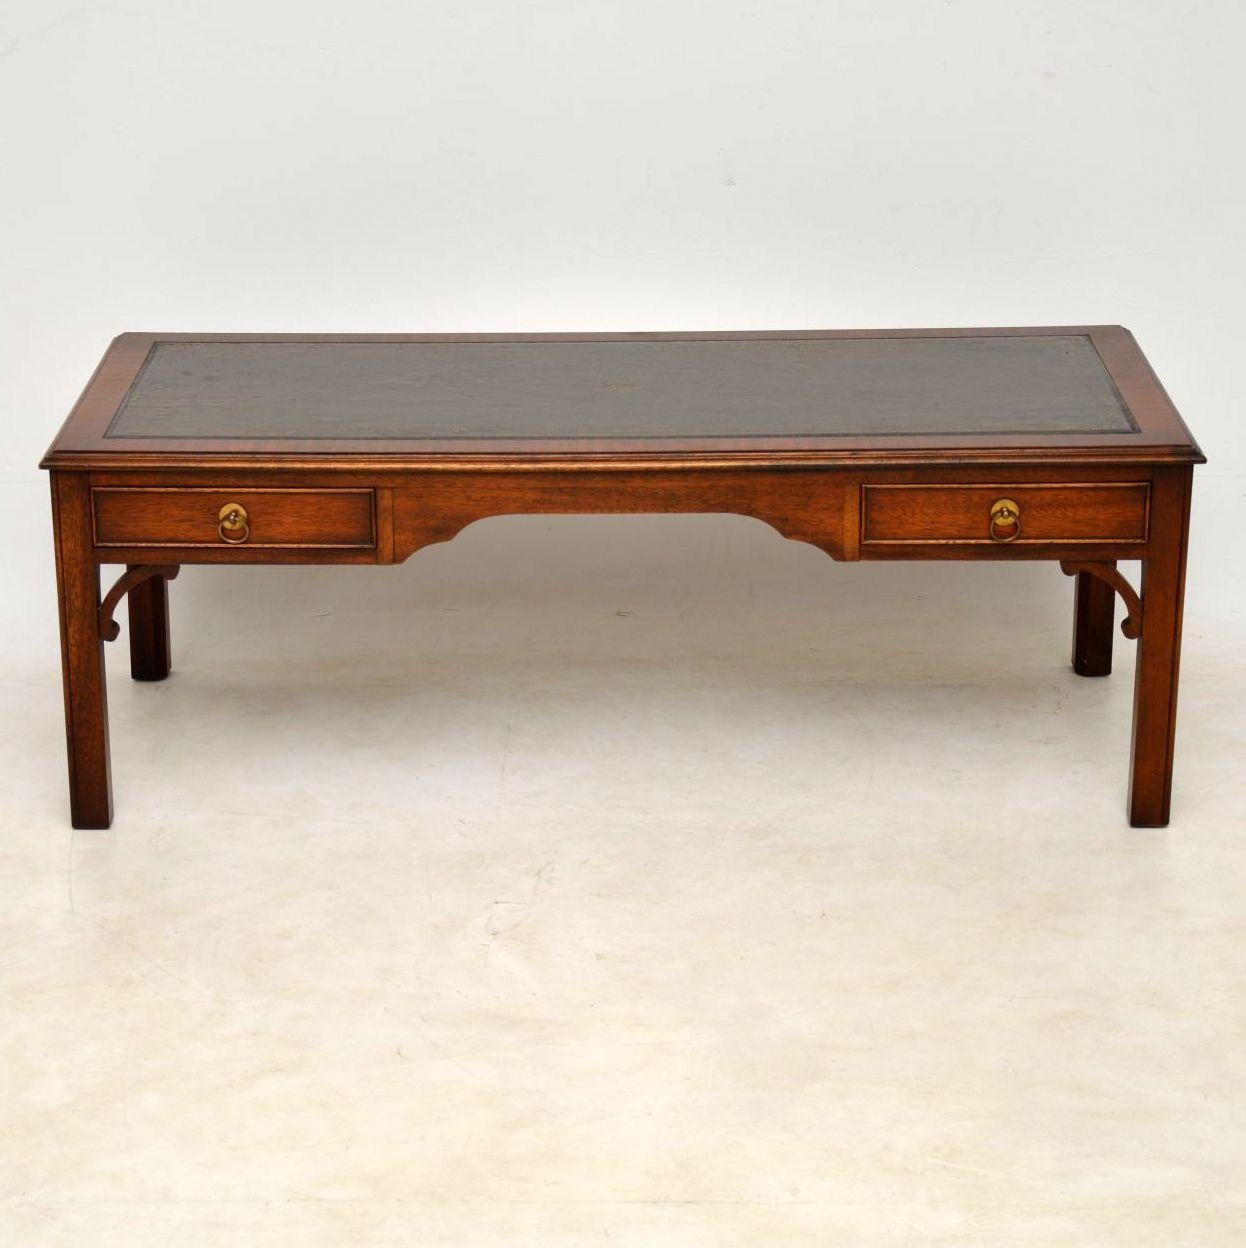 Large antique Georgian style leather top mahogany coffee table. It’s in good original condition & is about 50 years old. This coffee table has a tooled leather top, drawers on one side & dummy drawers on the other side. The legs are chamfered &